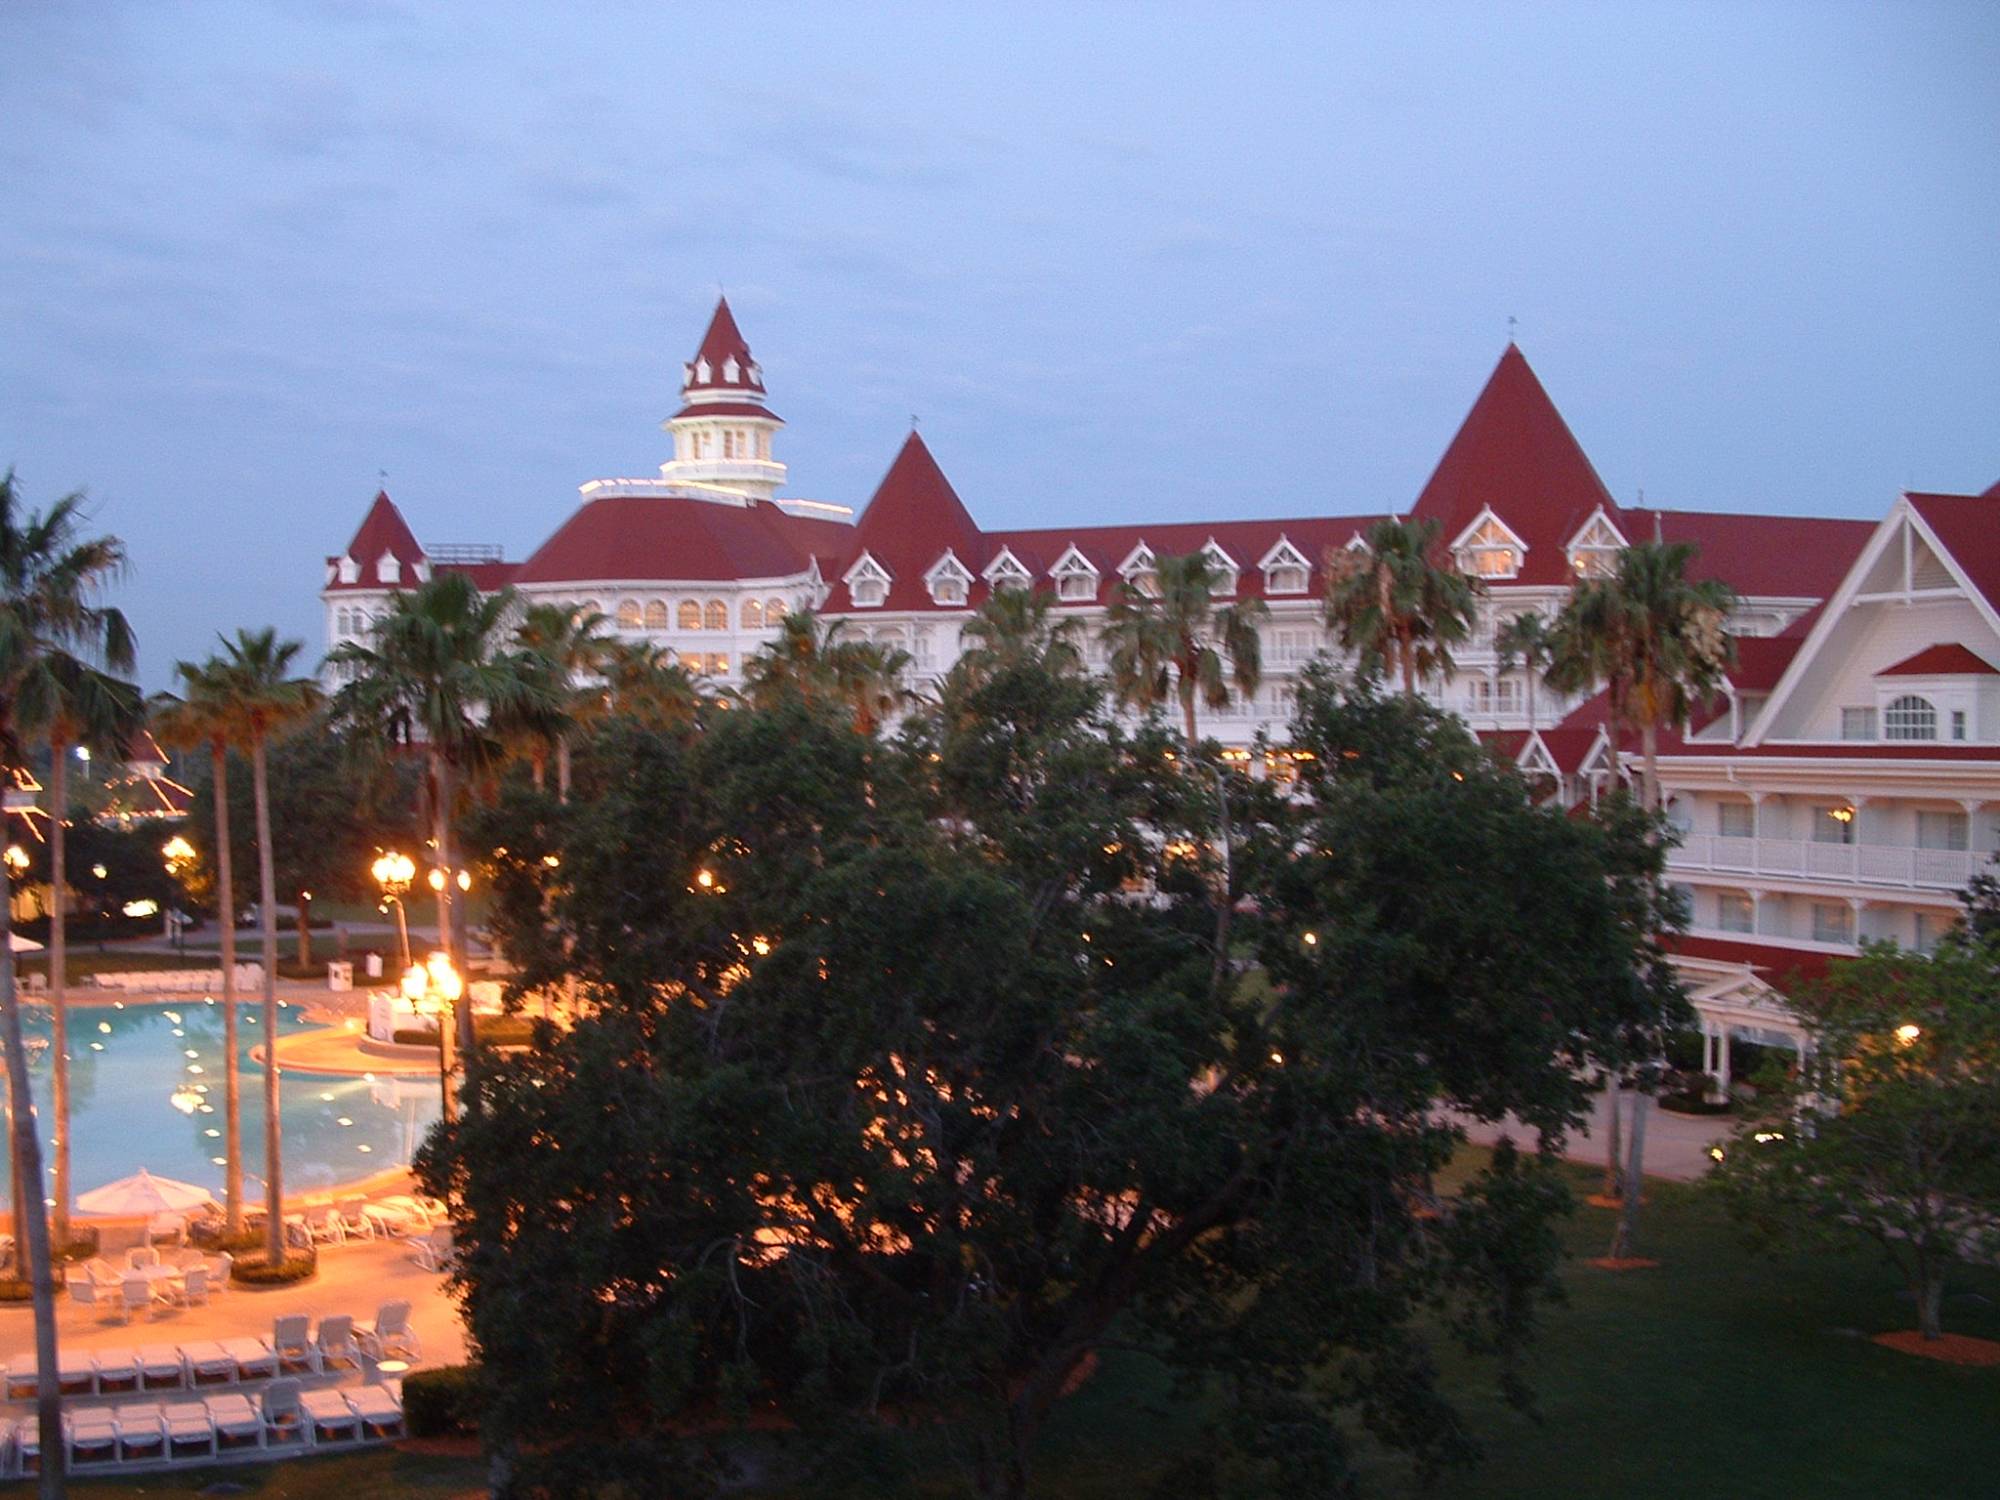 Grand Floridian Resort - View From Dormer Room